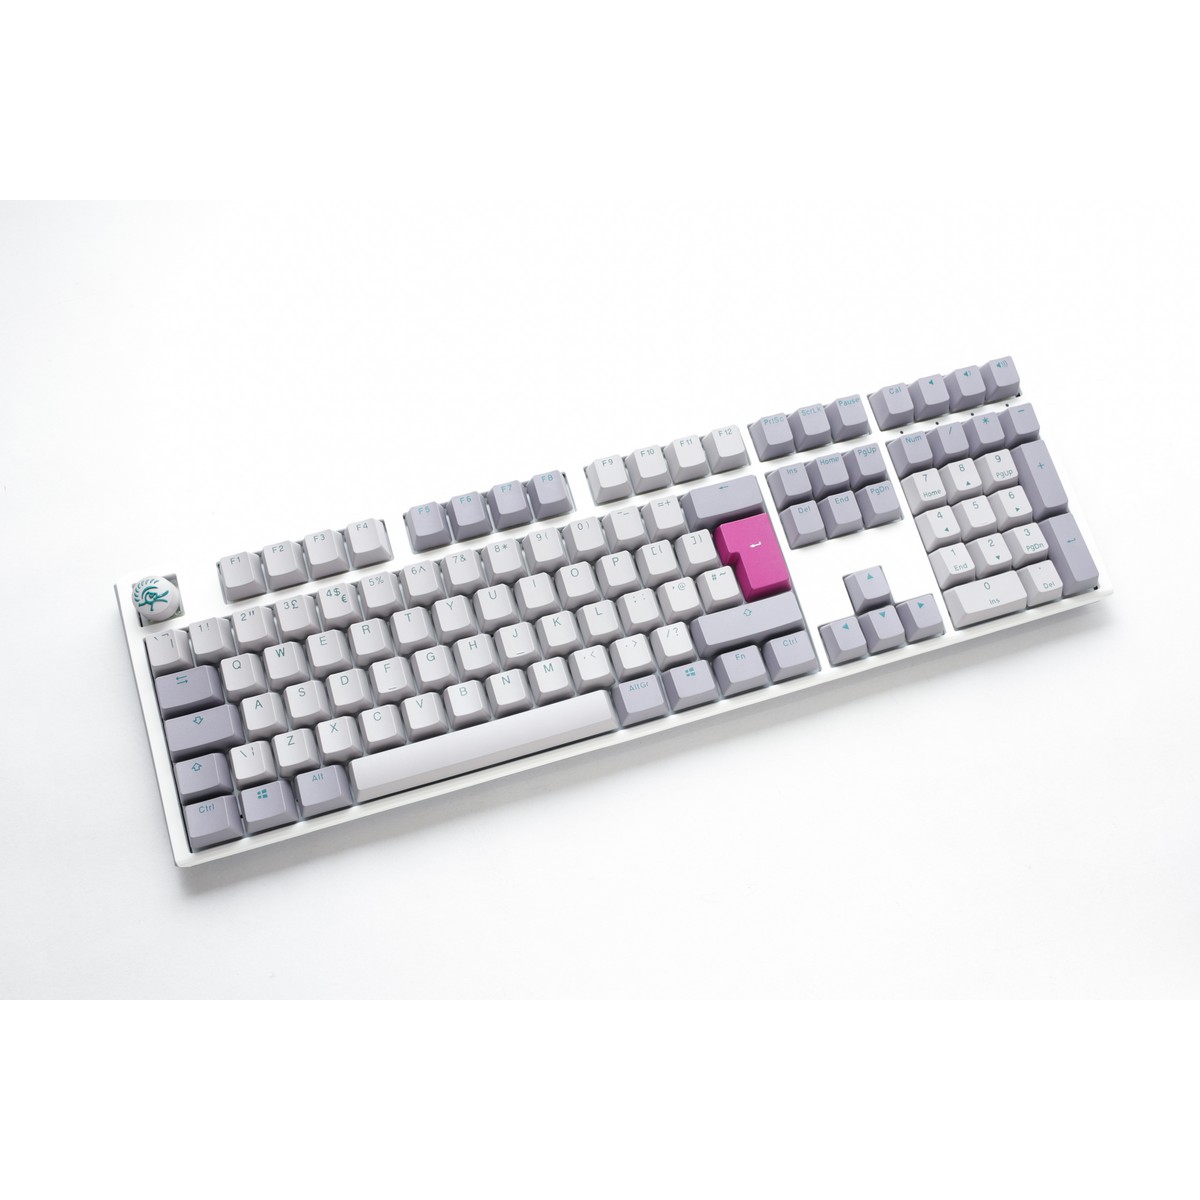 Ducky - Ducky One 3 Mist USB RGB Mechanical Gaming Keyboard Cherry MX Brown Switch - UK Layout